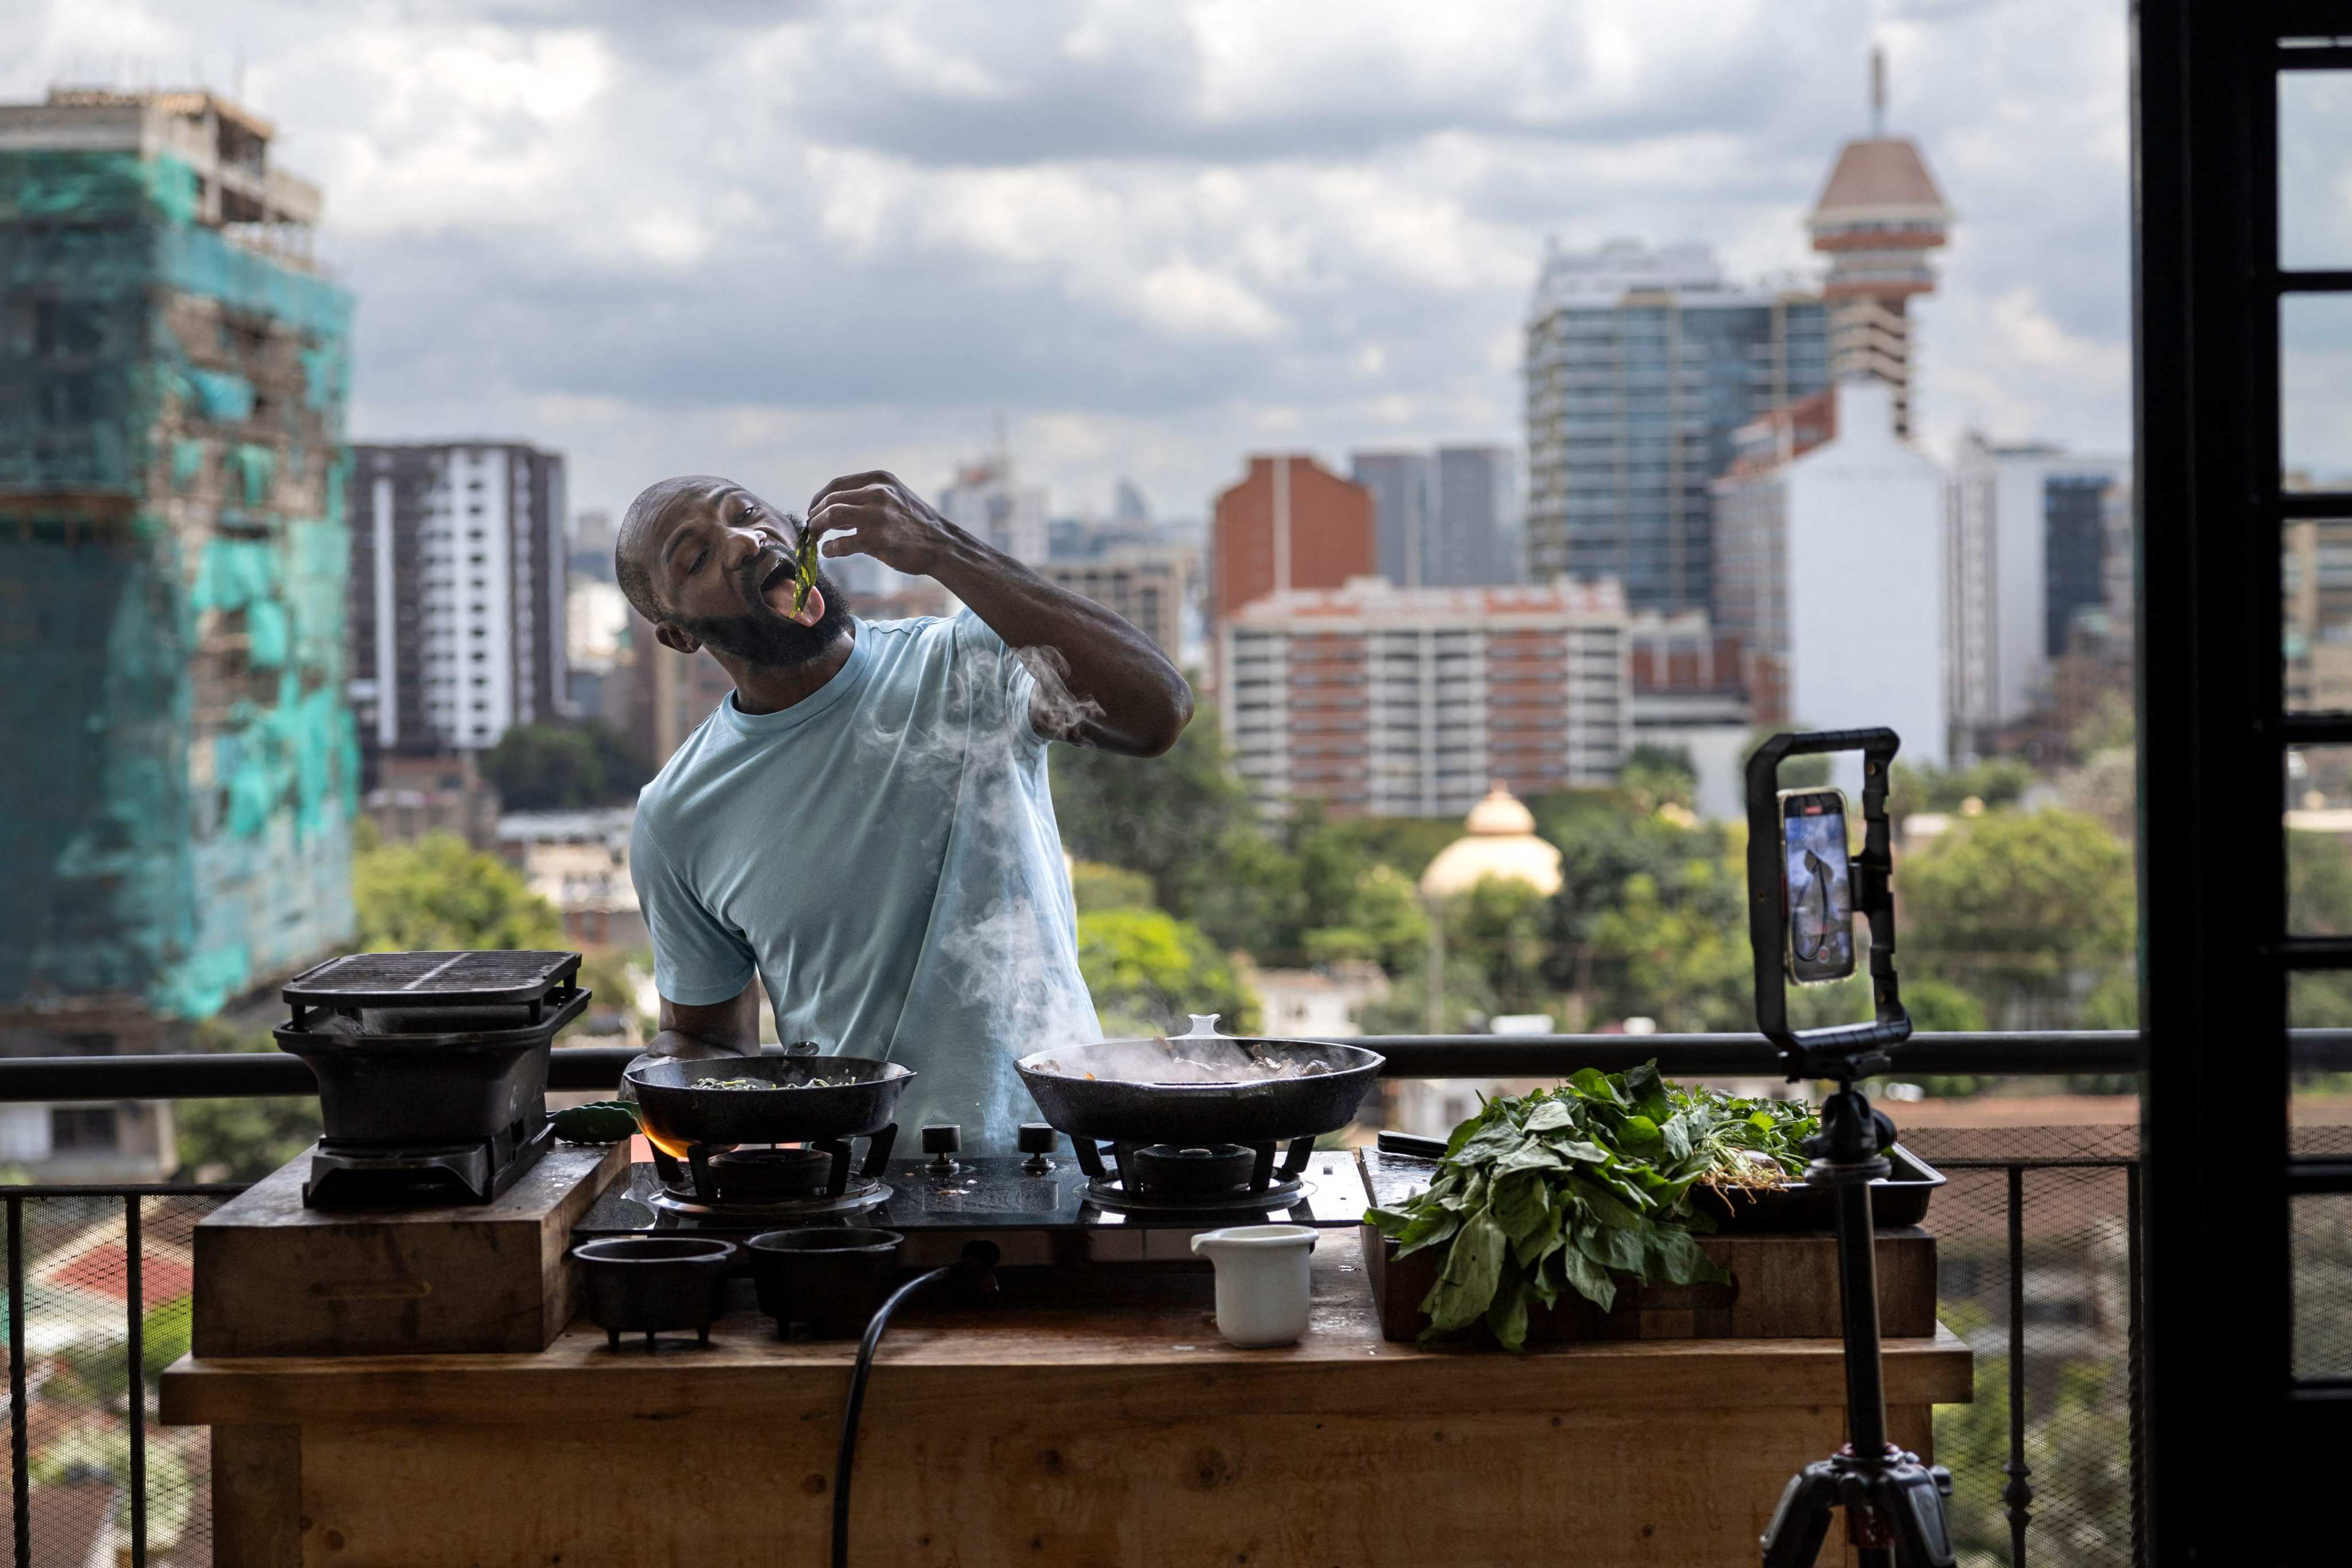 Former Kenya rugby sevens star Dennis Ombachi on the set of his cooking videos featuring his famous balcony with the Kenyan capital, Nairobi, in the background. Photo: AFP